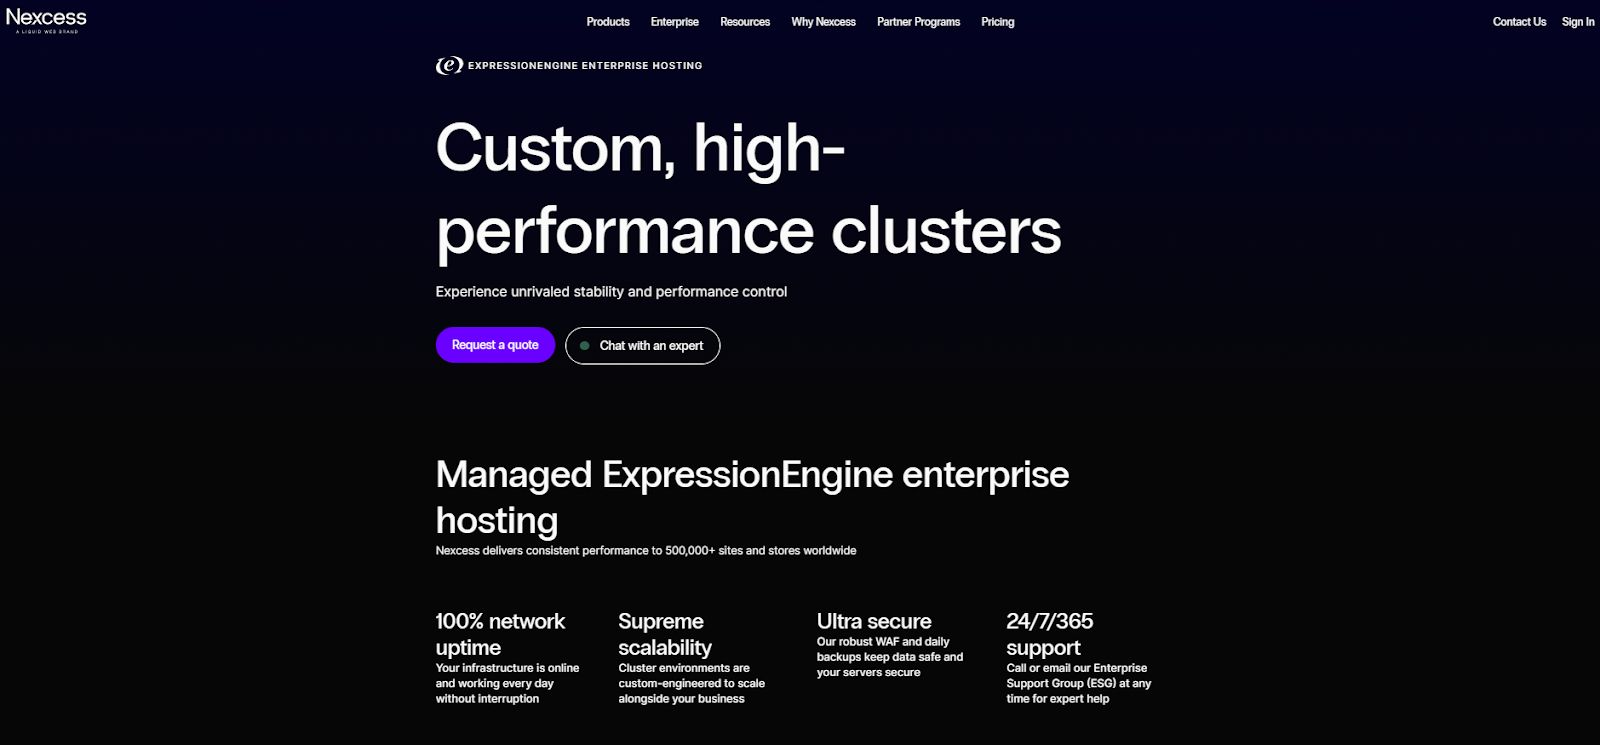 Managed servers for ExpressionEngine CMS from Nexcess.